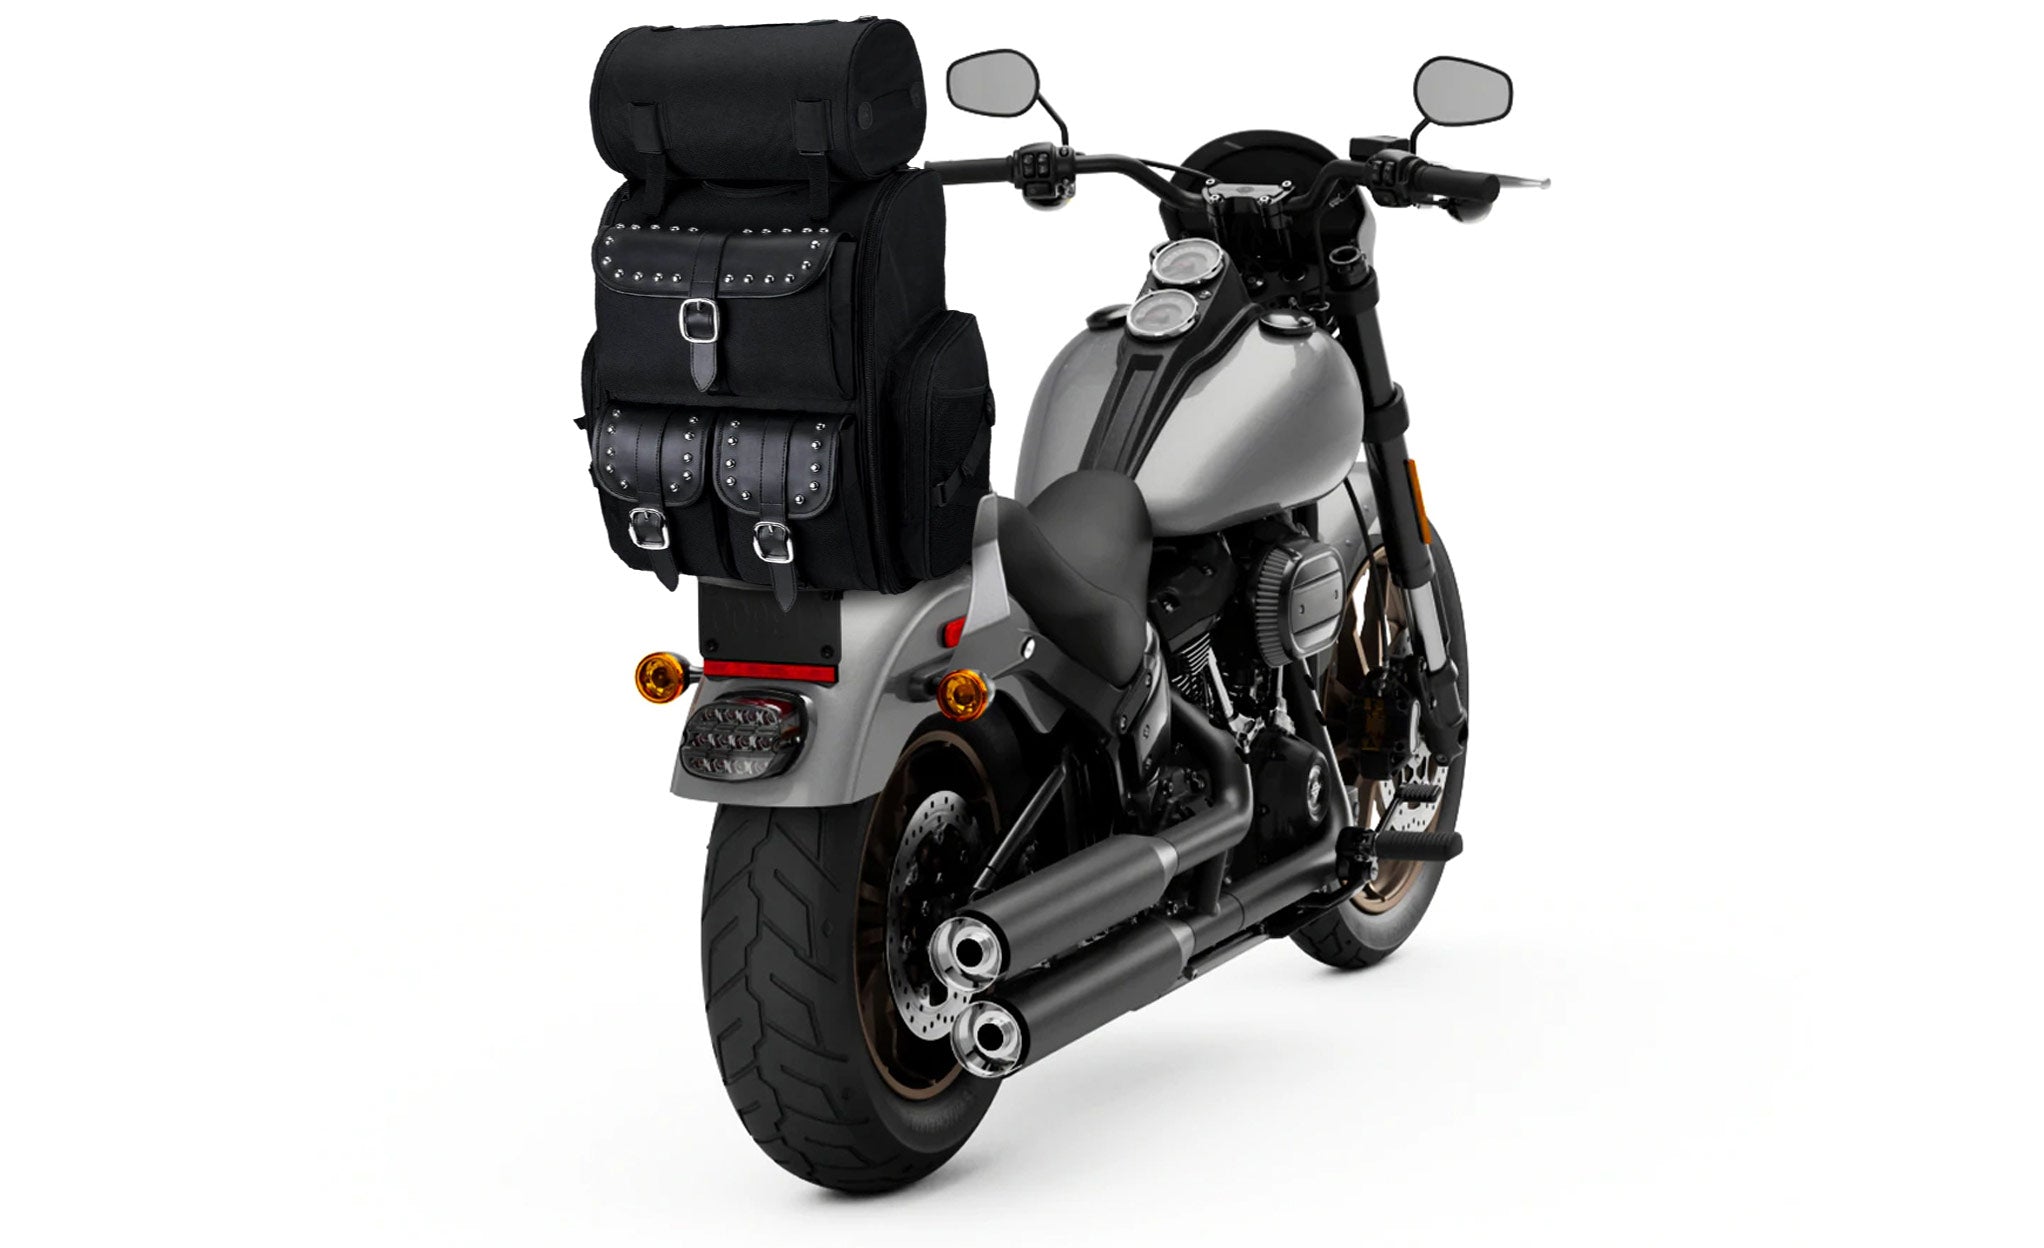 Viking Highway Extra Large Studded Victory Motorcycle Tail Bag Bag on Bike View @expand